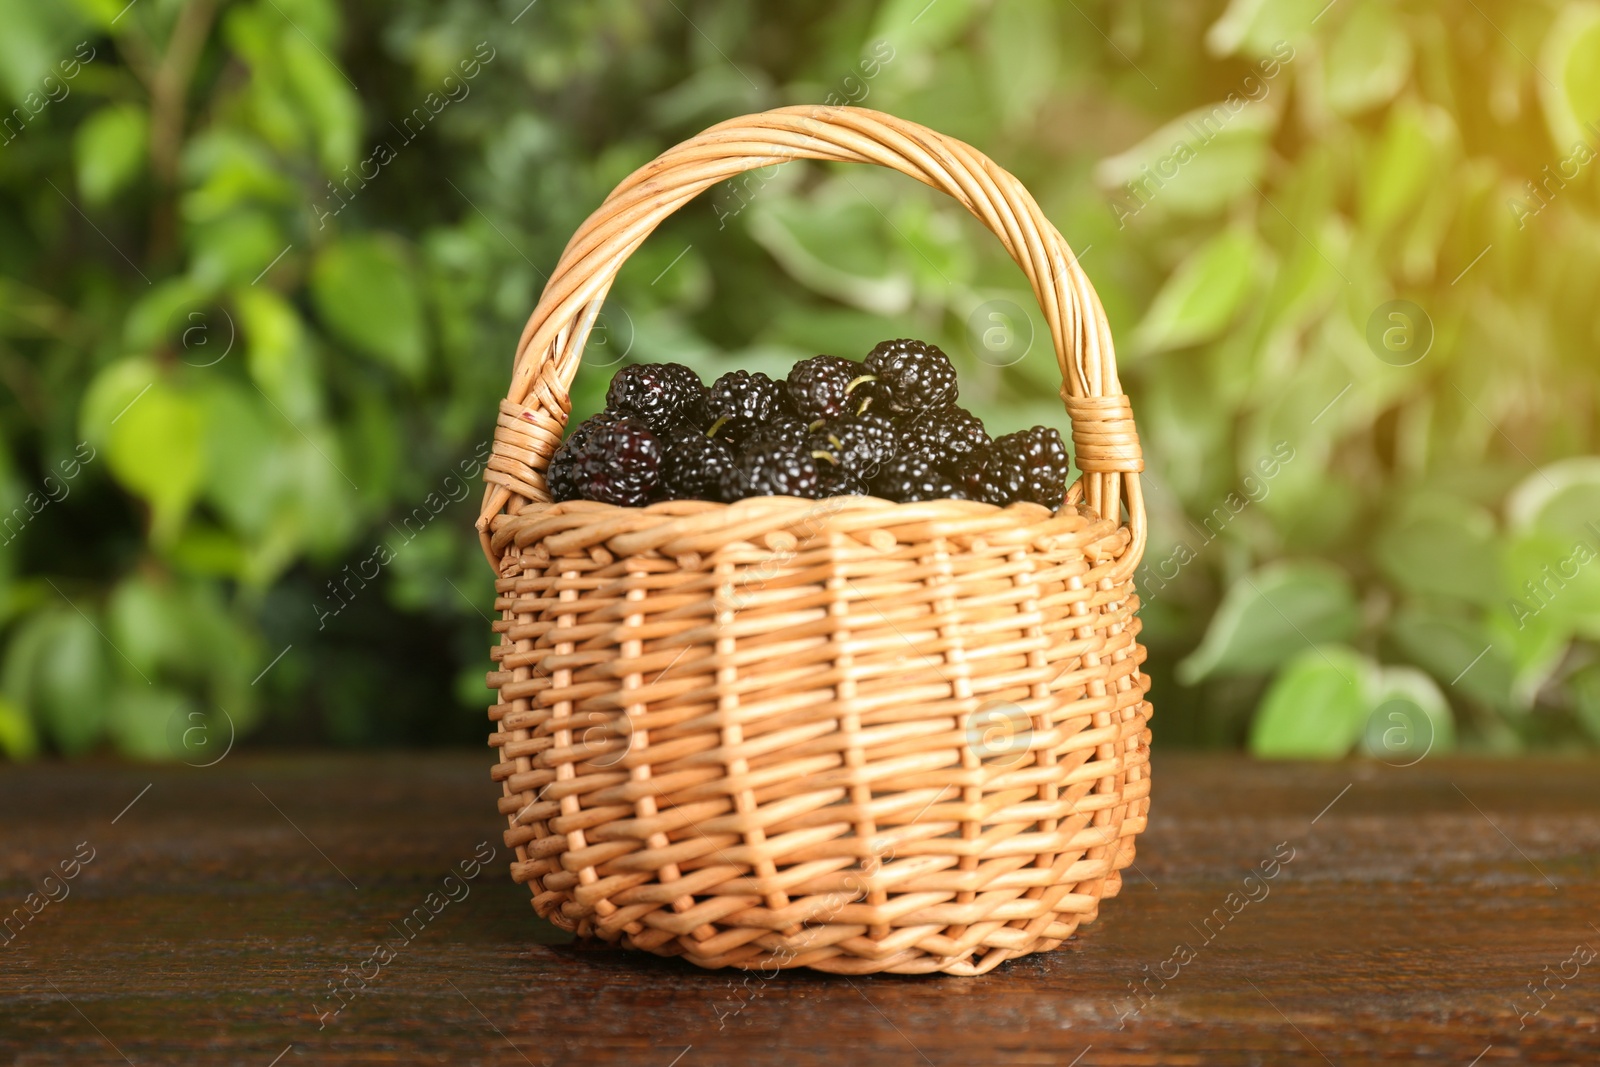 Photo of Ripe black mulberries in wicker basket on wooden table against blurred background